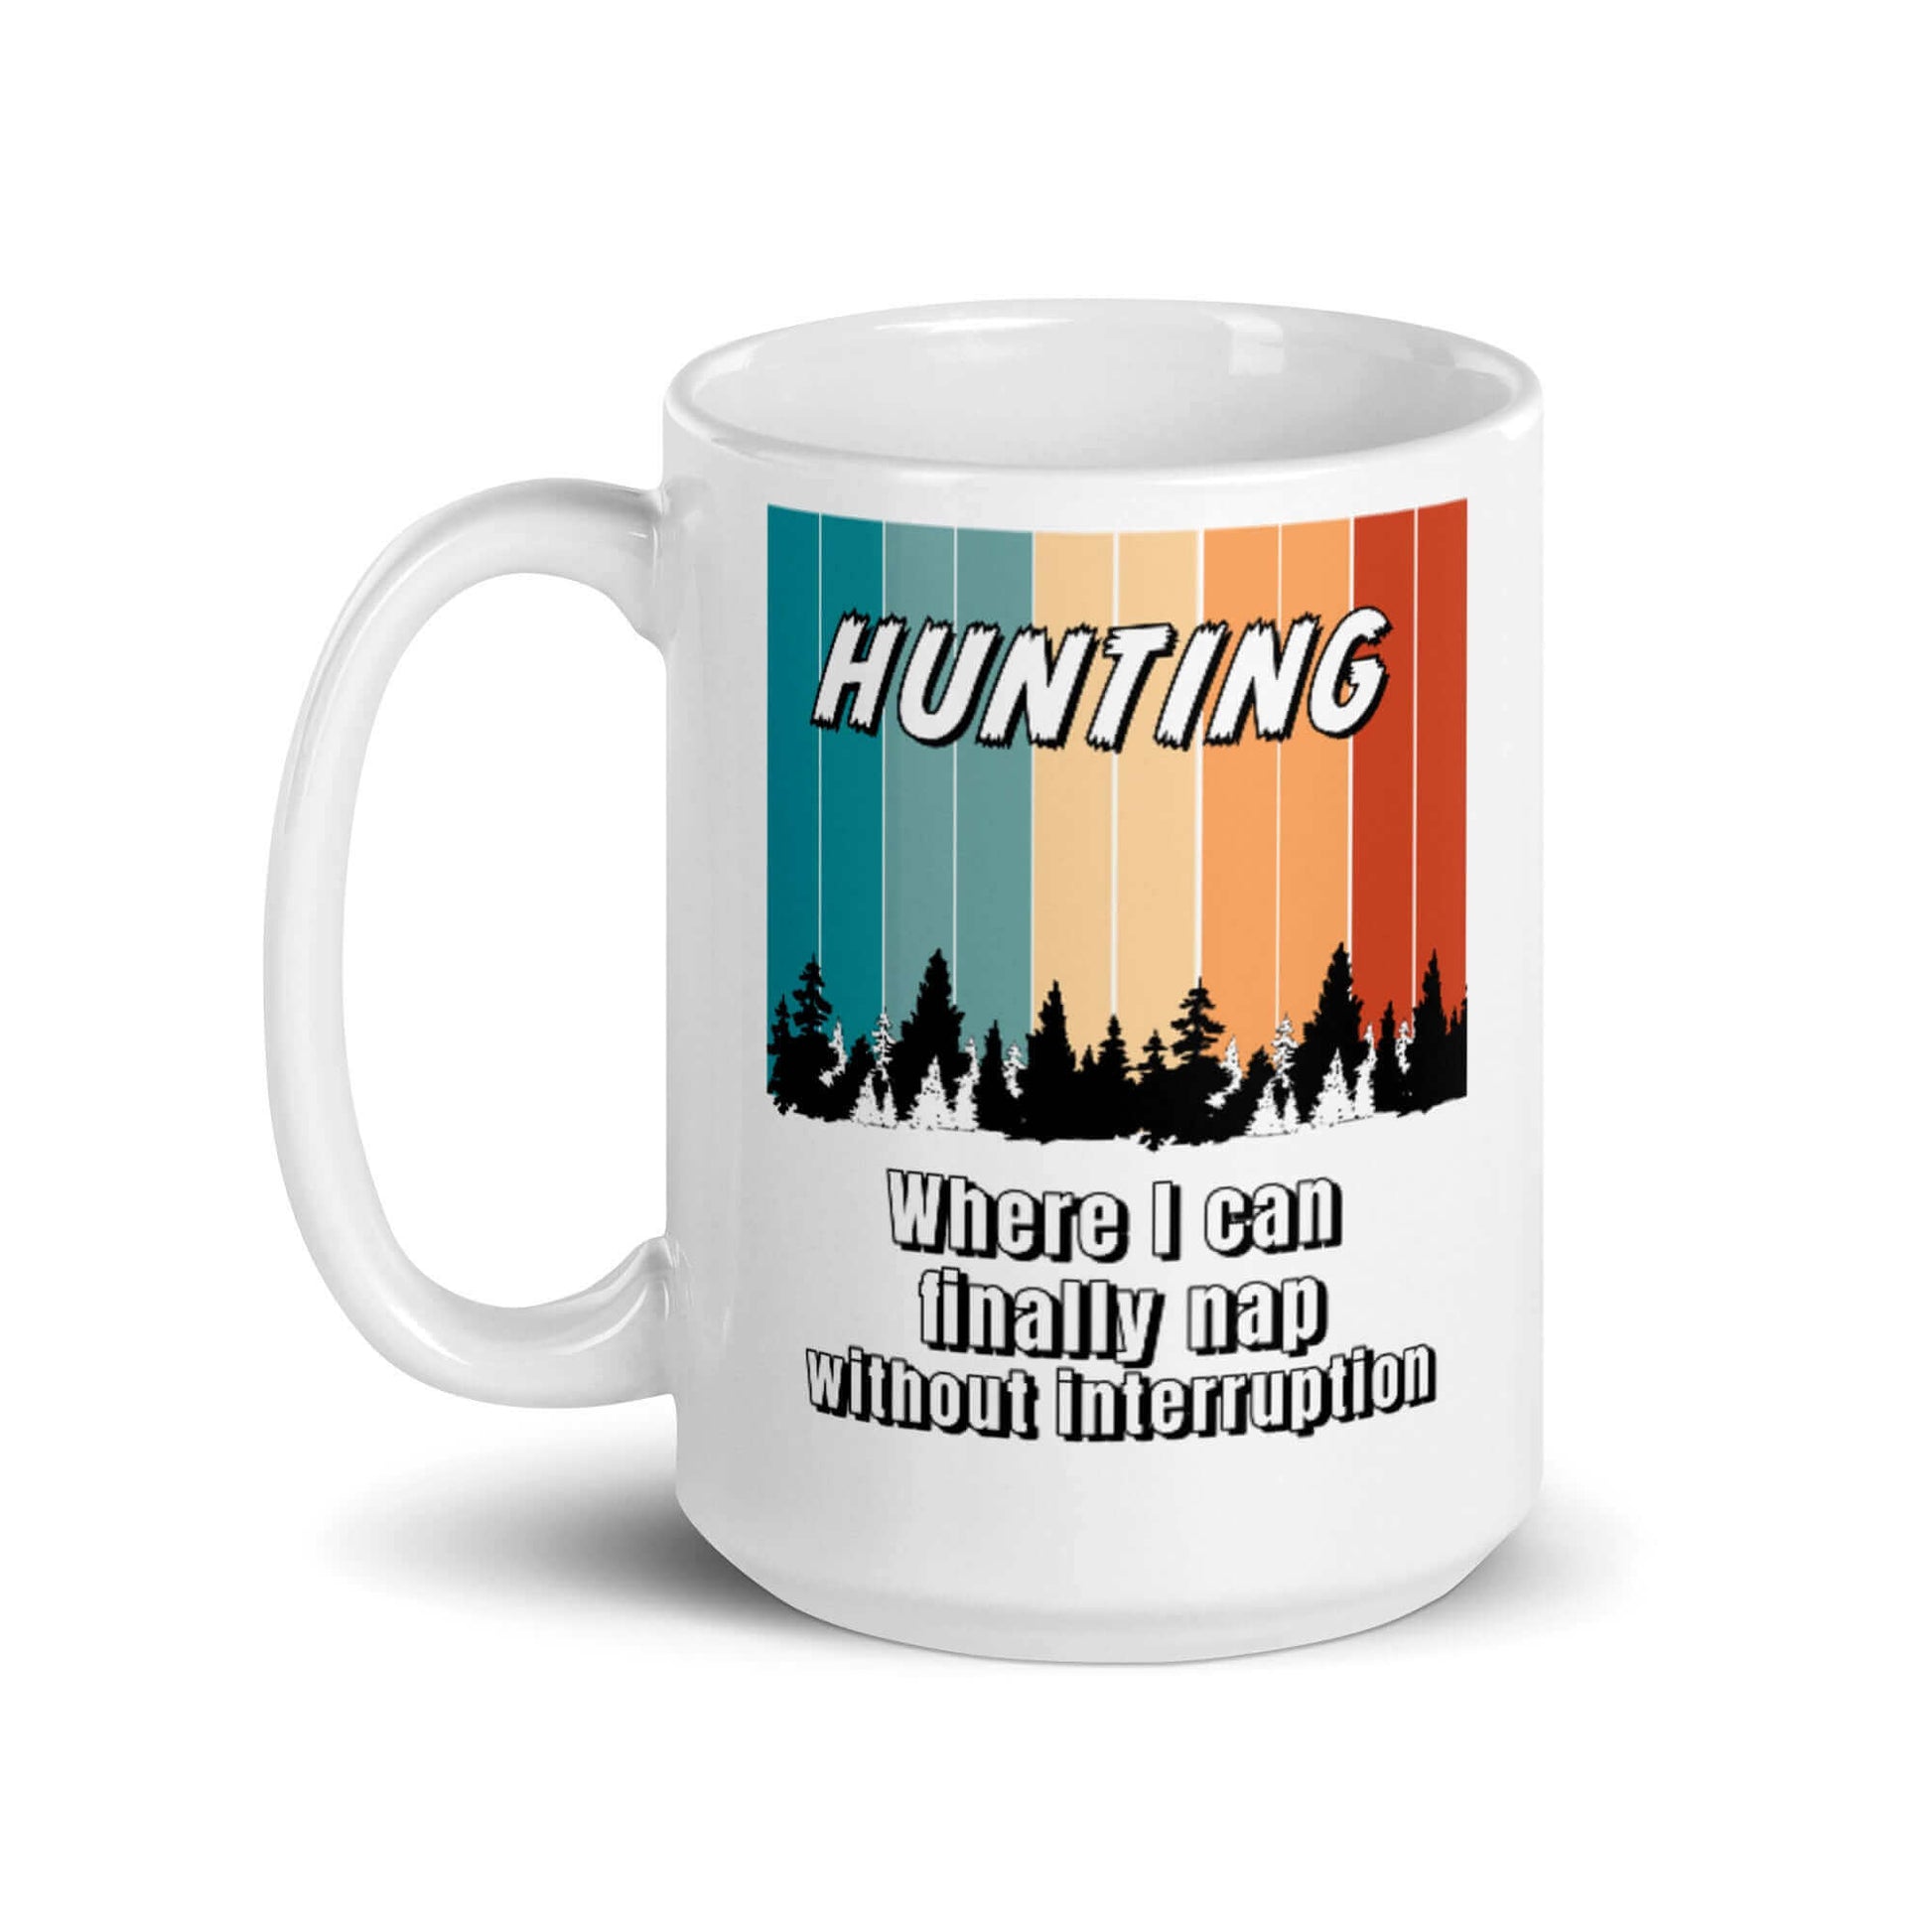 HUNTING - Where I get to nap without interruption - White glossy mug - Horrible Designs